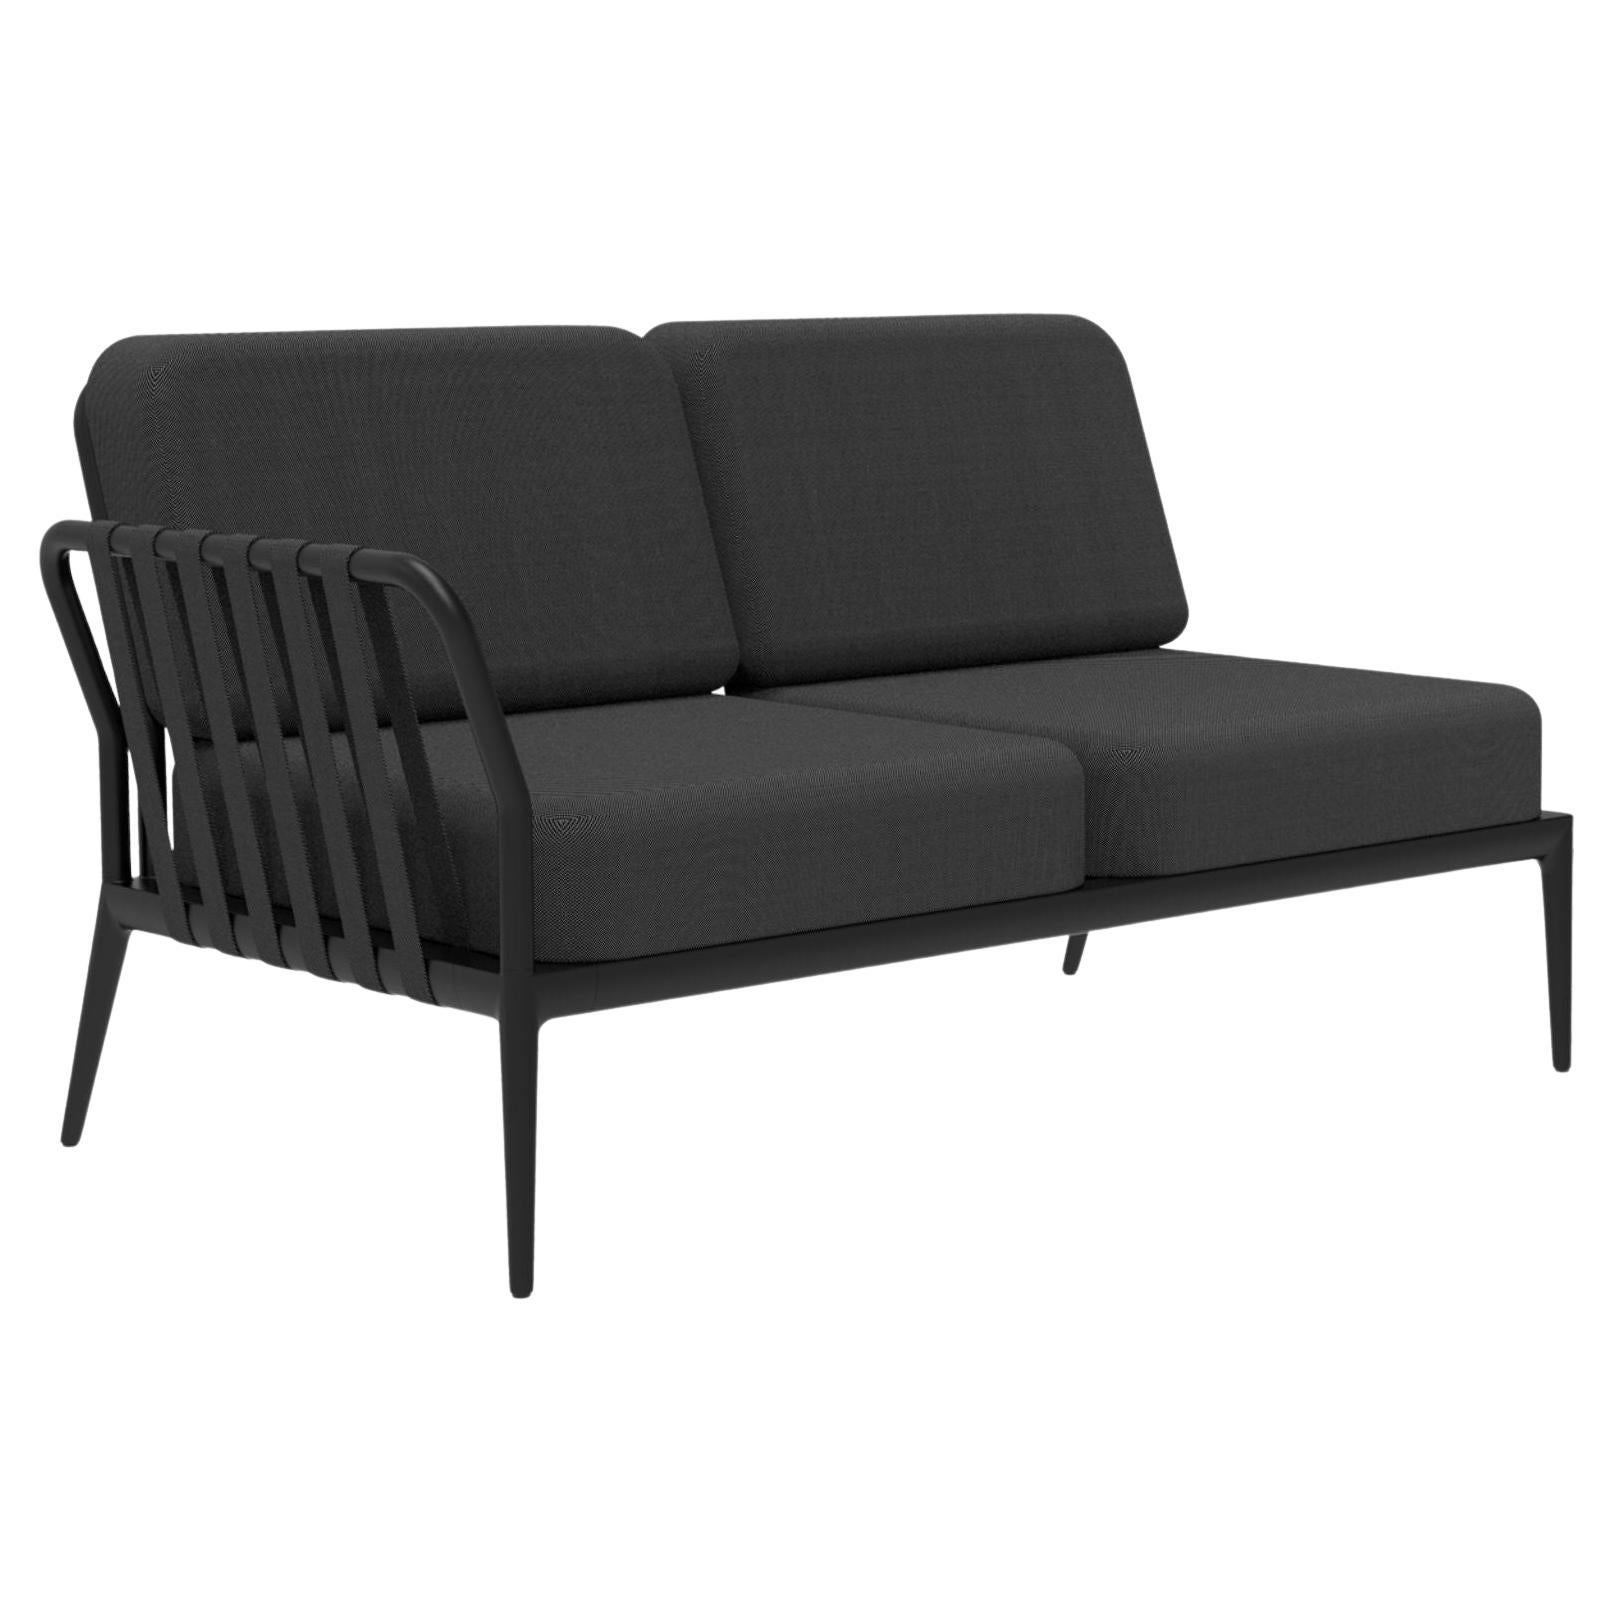 Ribbons Black Double Right Modular Sofa by Mowee For Sale